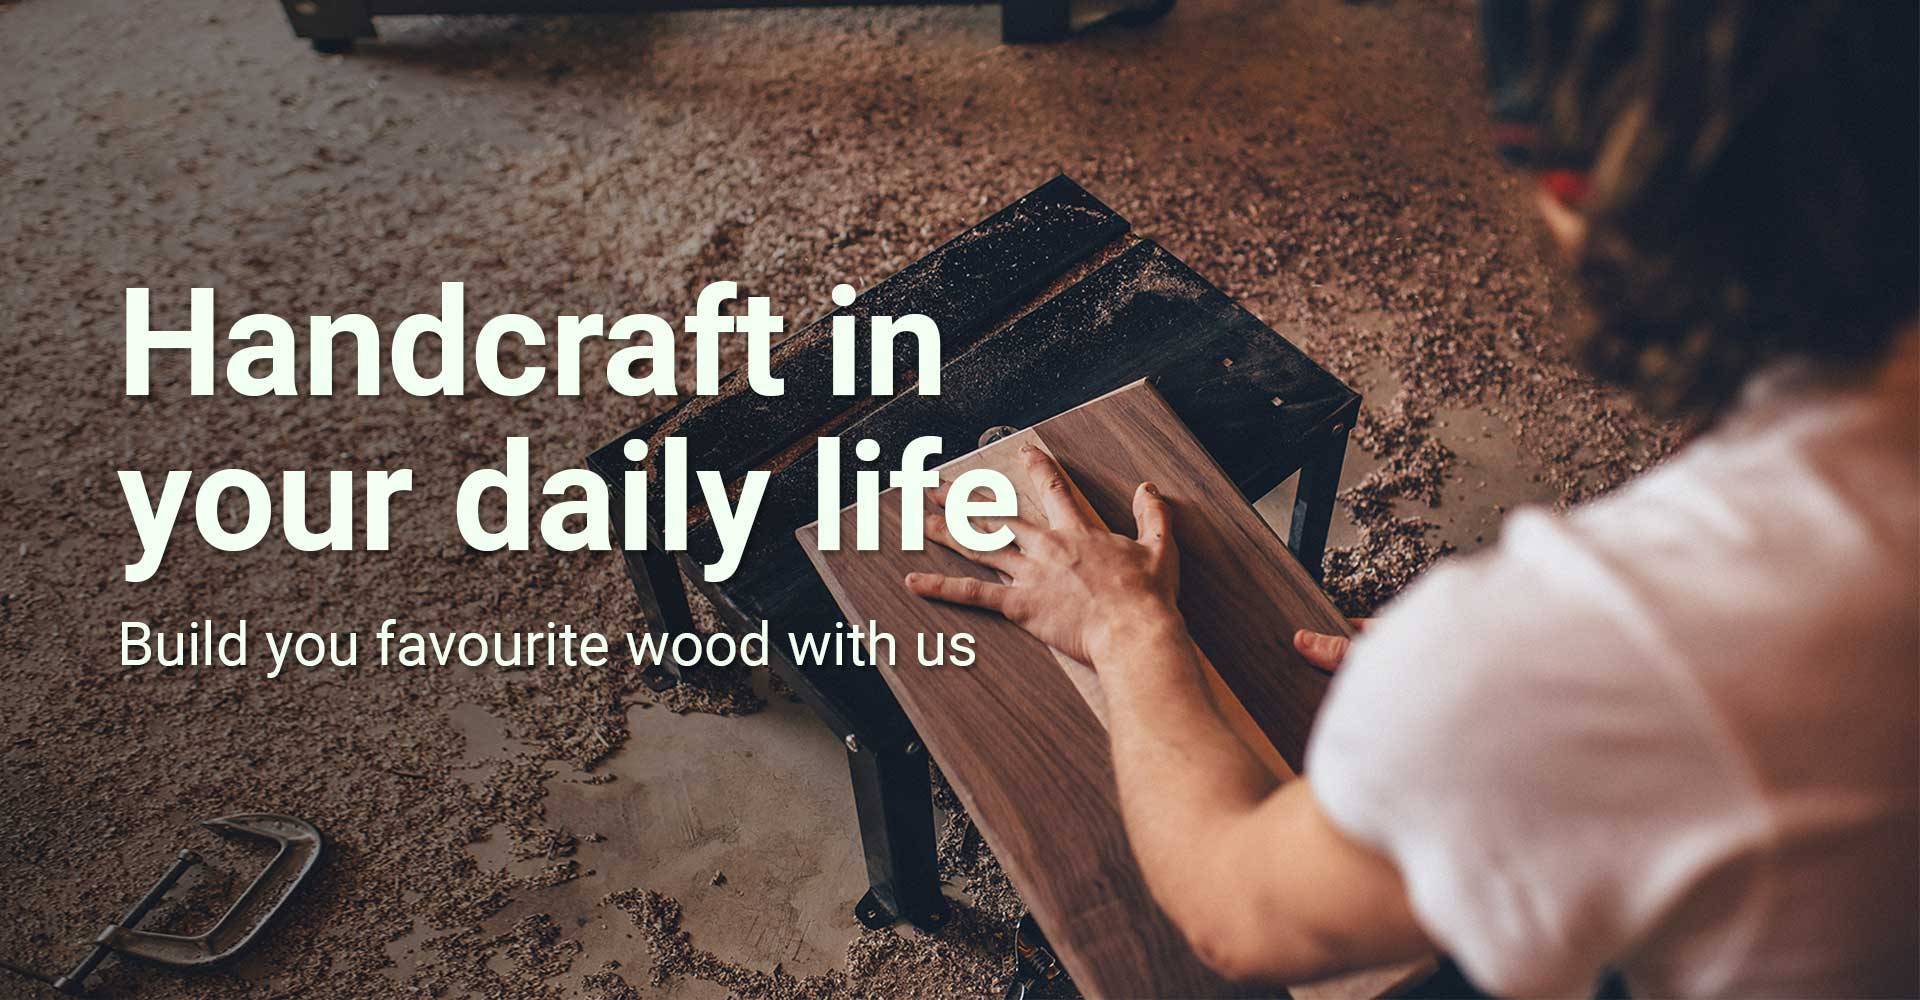 Handcraft in your daily life